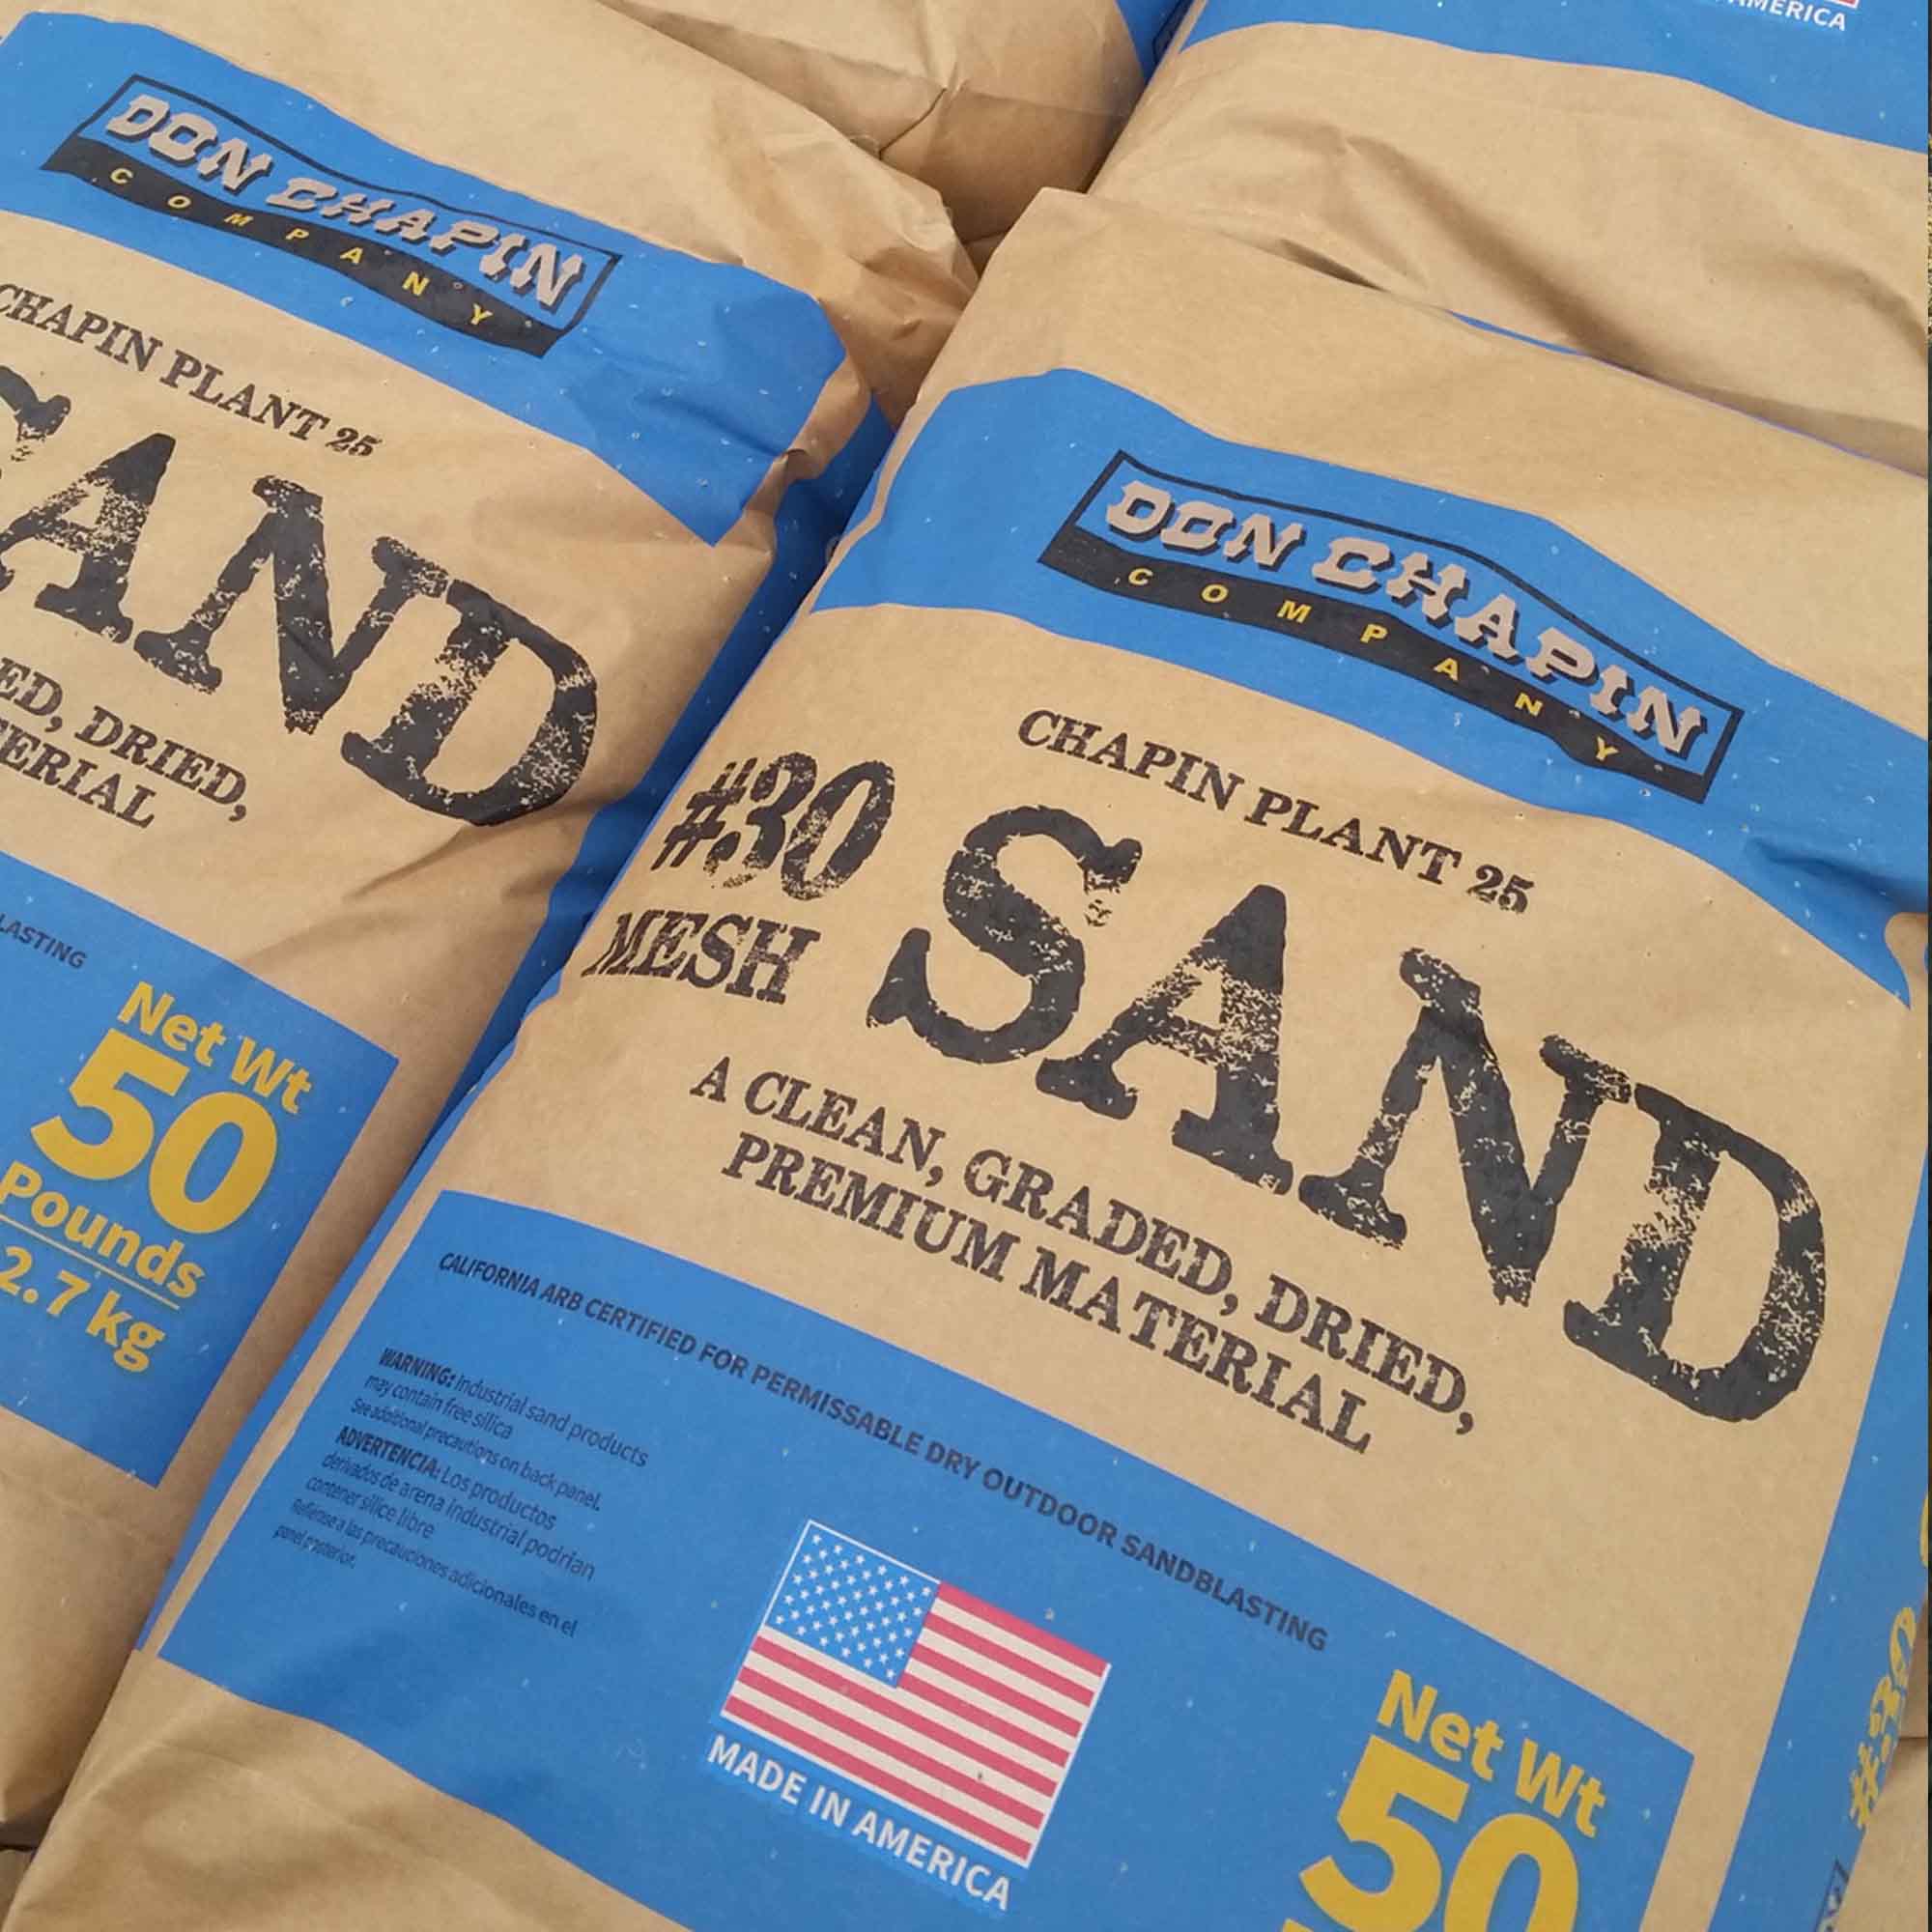 Don Chapin 50 pound sand bags in Monterey county